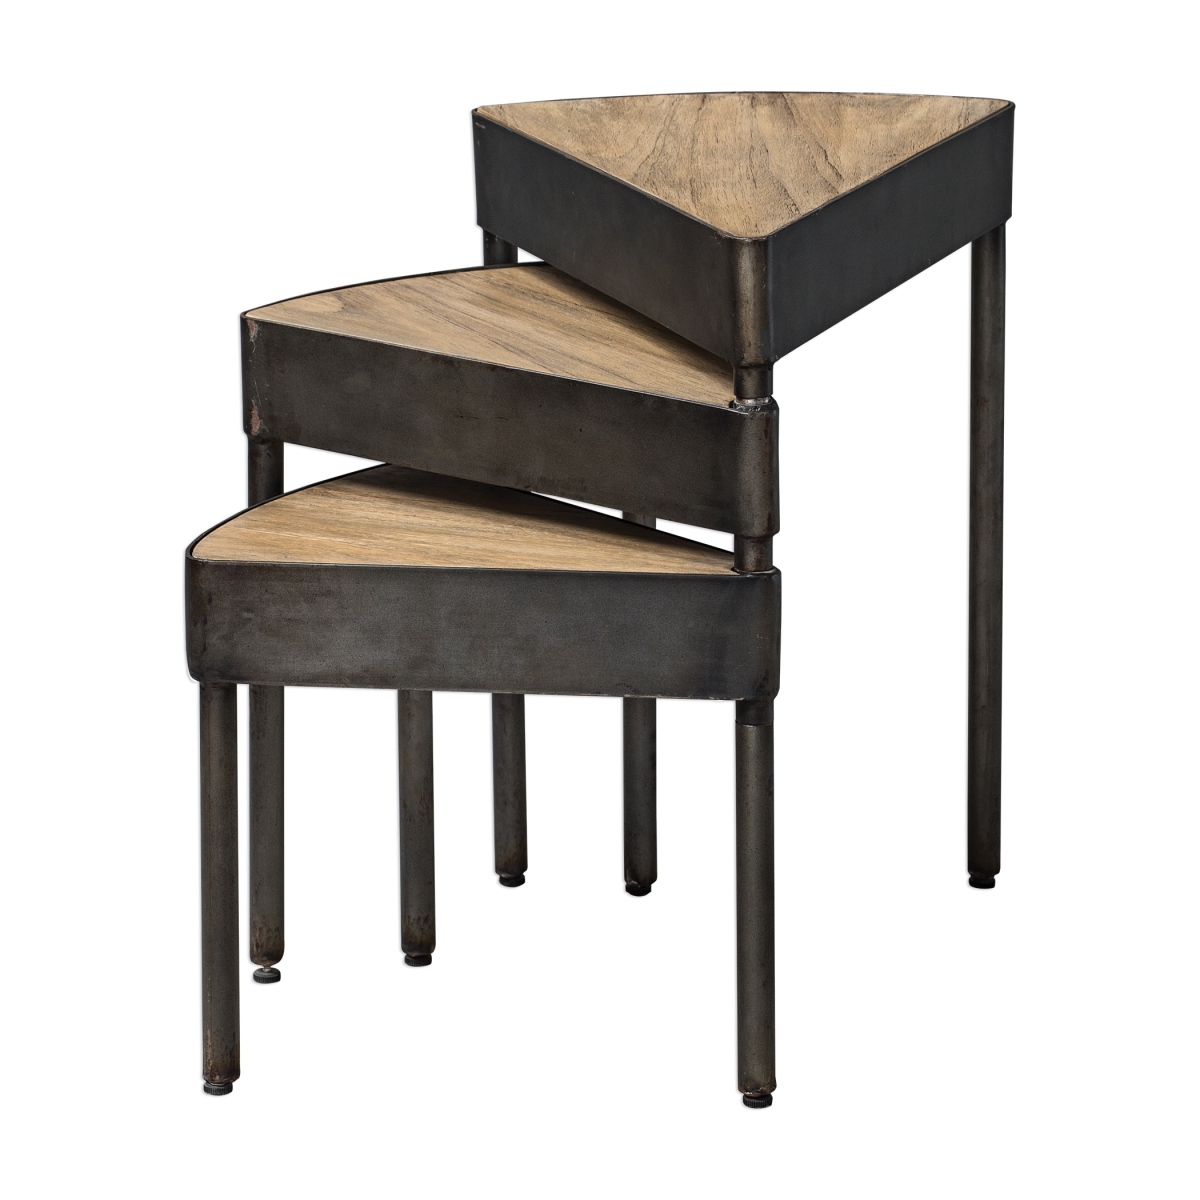 Picture of 212 Main 25432 Akito Swivel Nesting Table